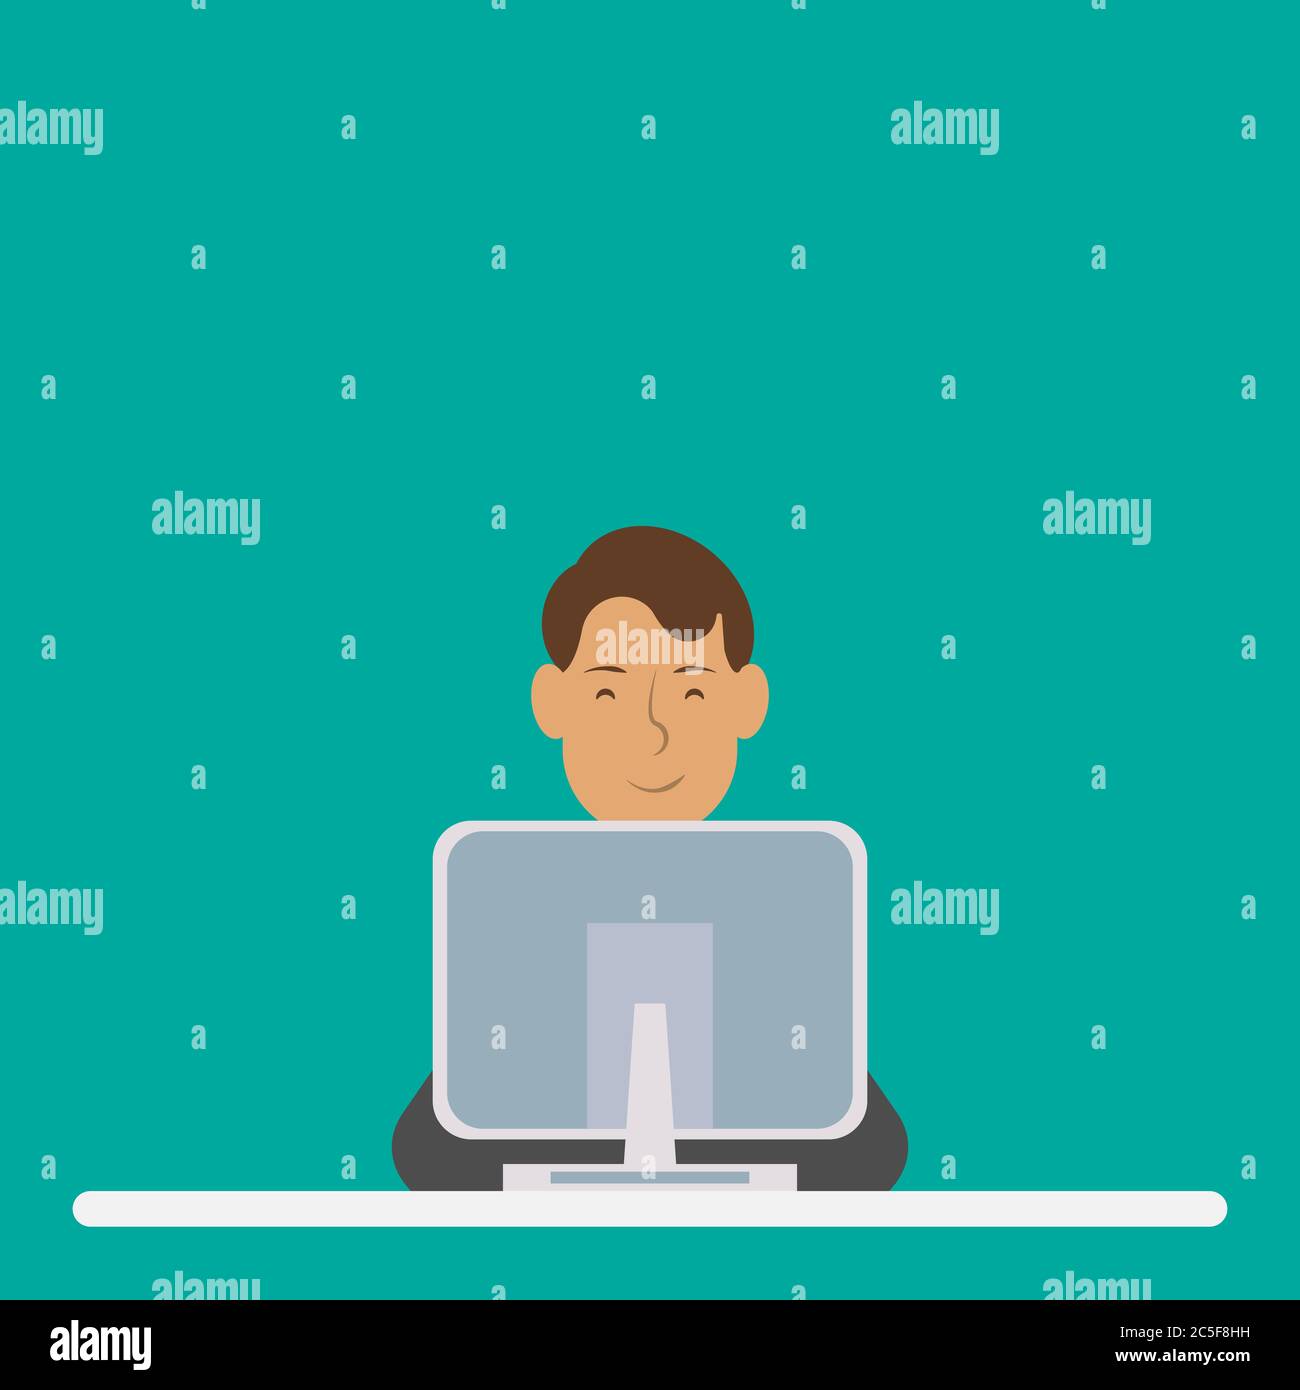 Freelancer or employee working on a computer vector illustration. adult man sitting in front of a screen isolated on green background. Stock Vector